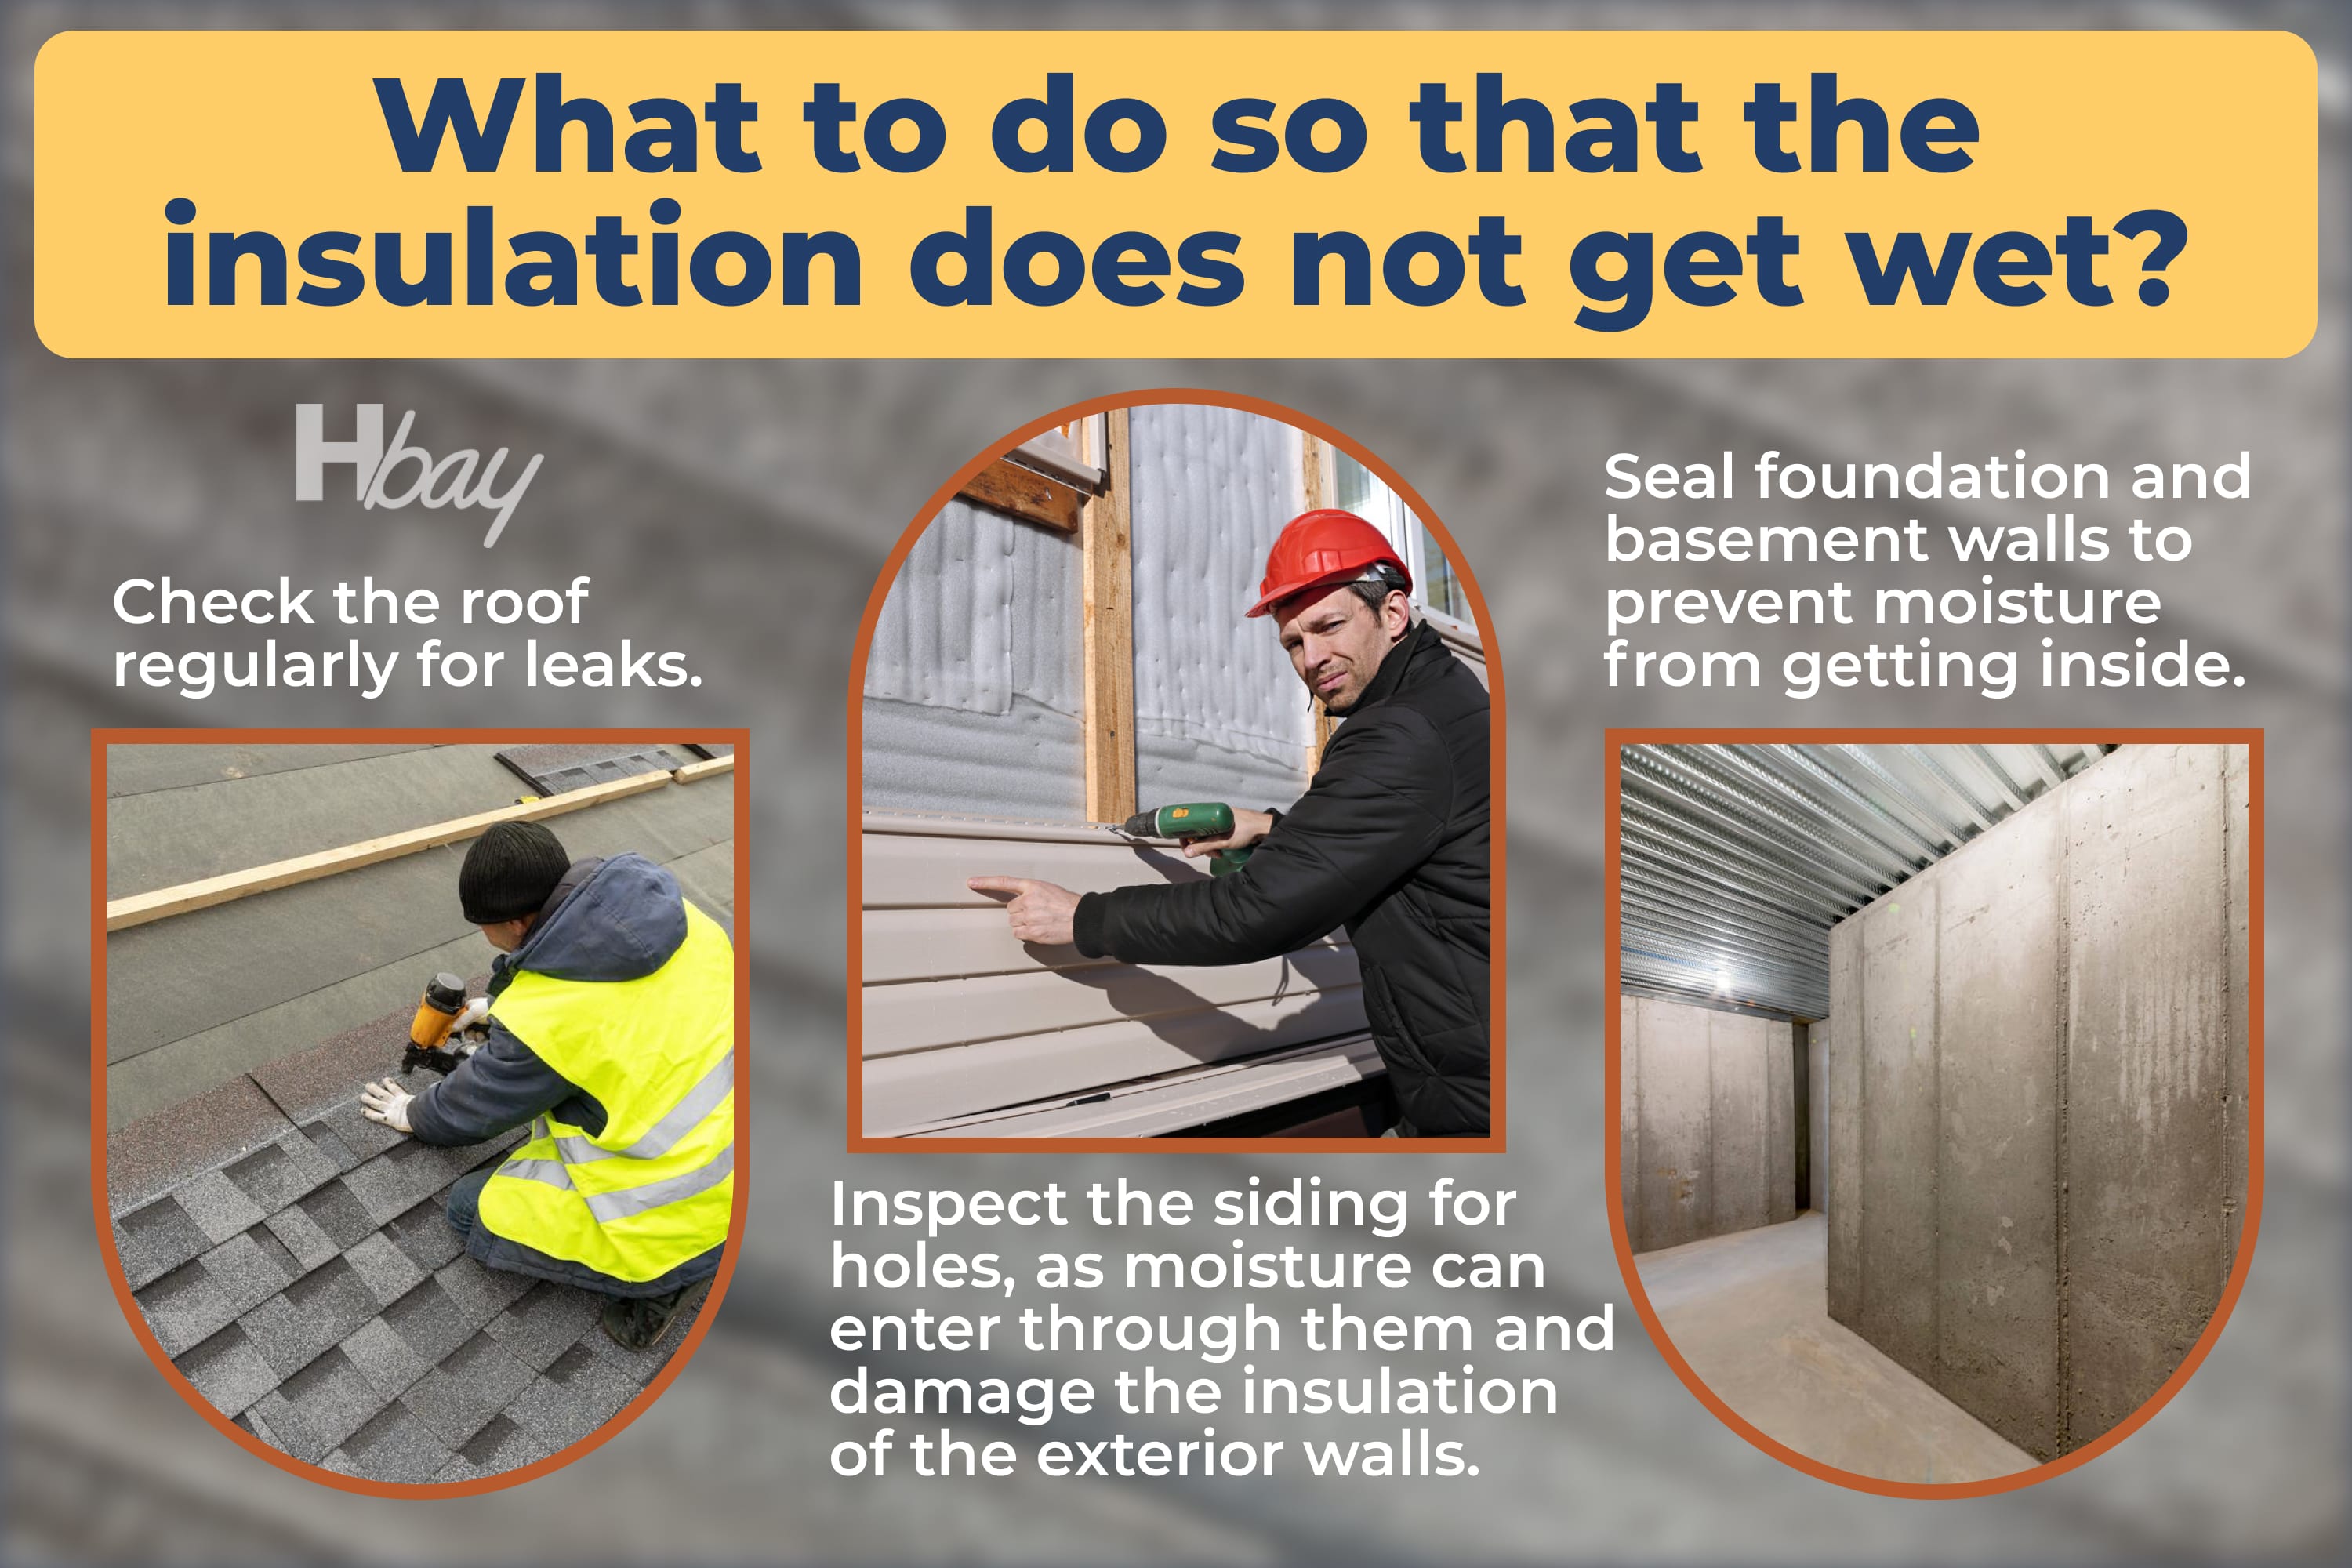 What to do so that the insulation does not get wet